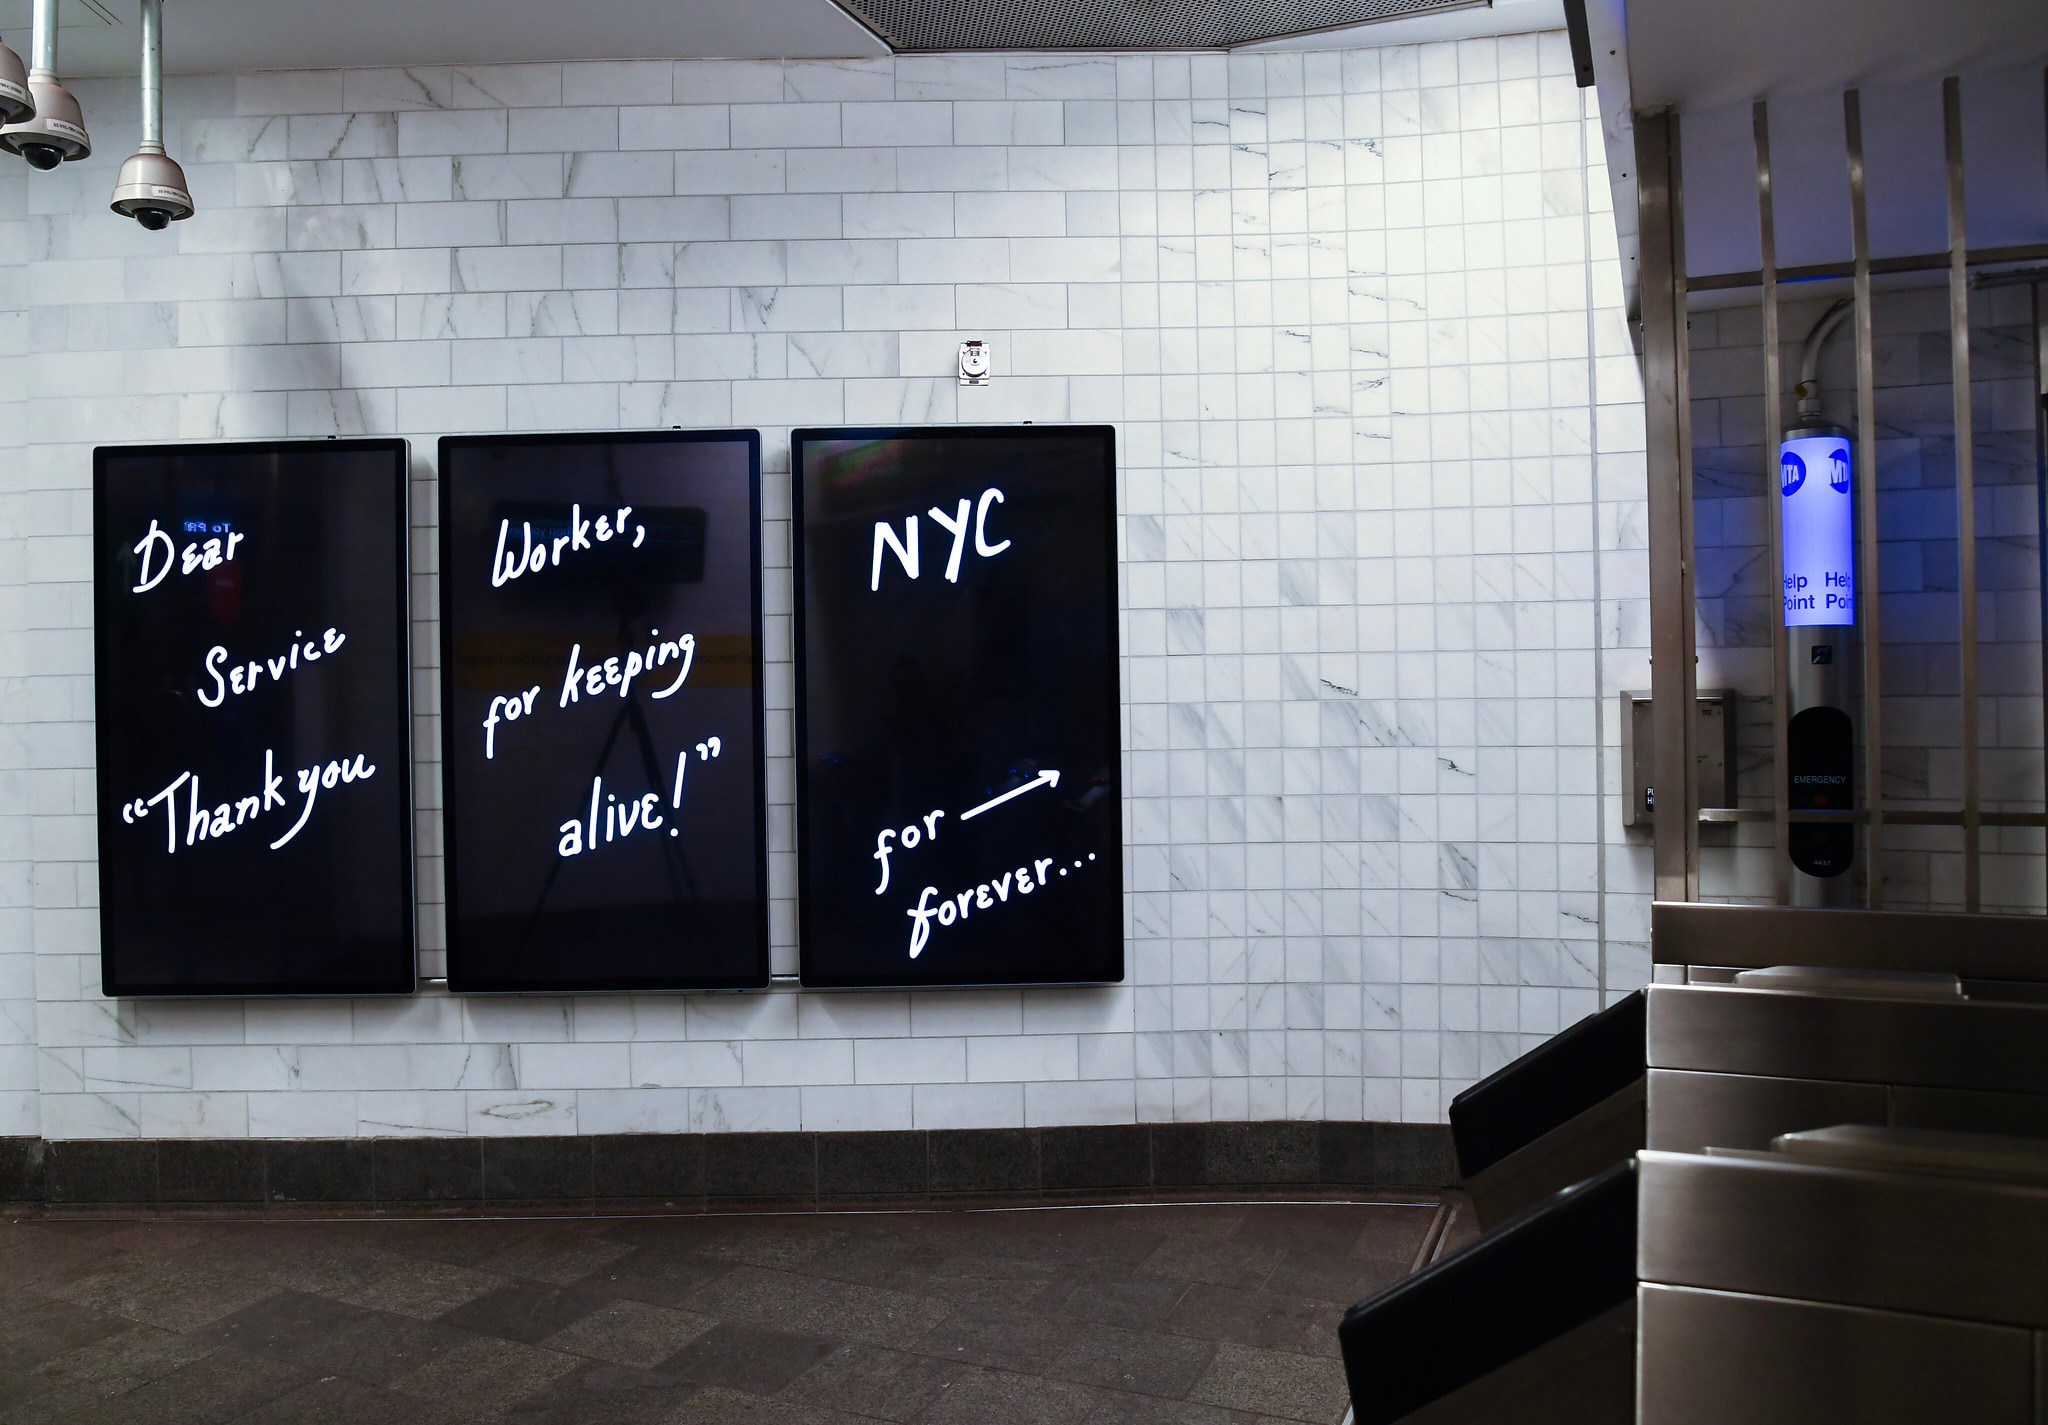 Artist Mierle Laderman Ukeles Celebrates Public Service Workers with Artwork Across New York City